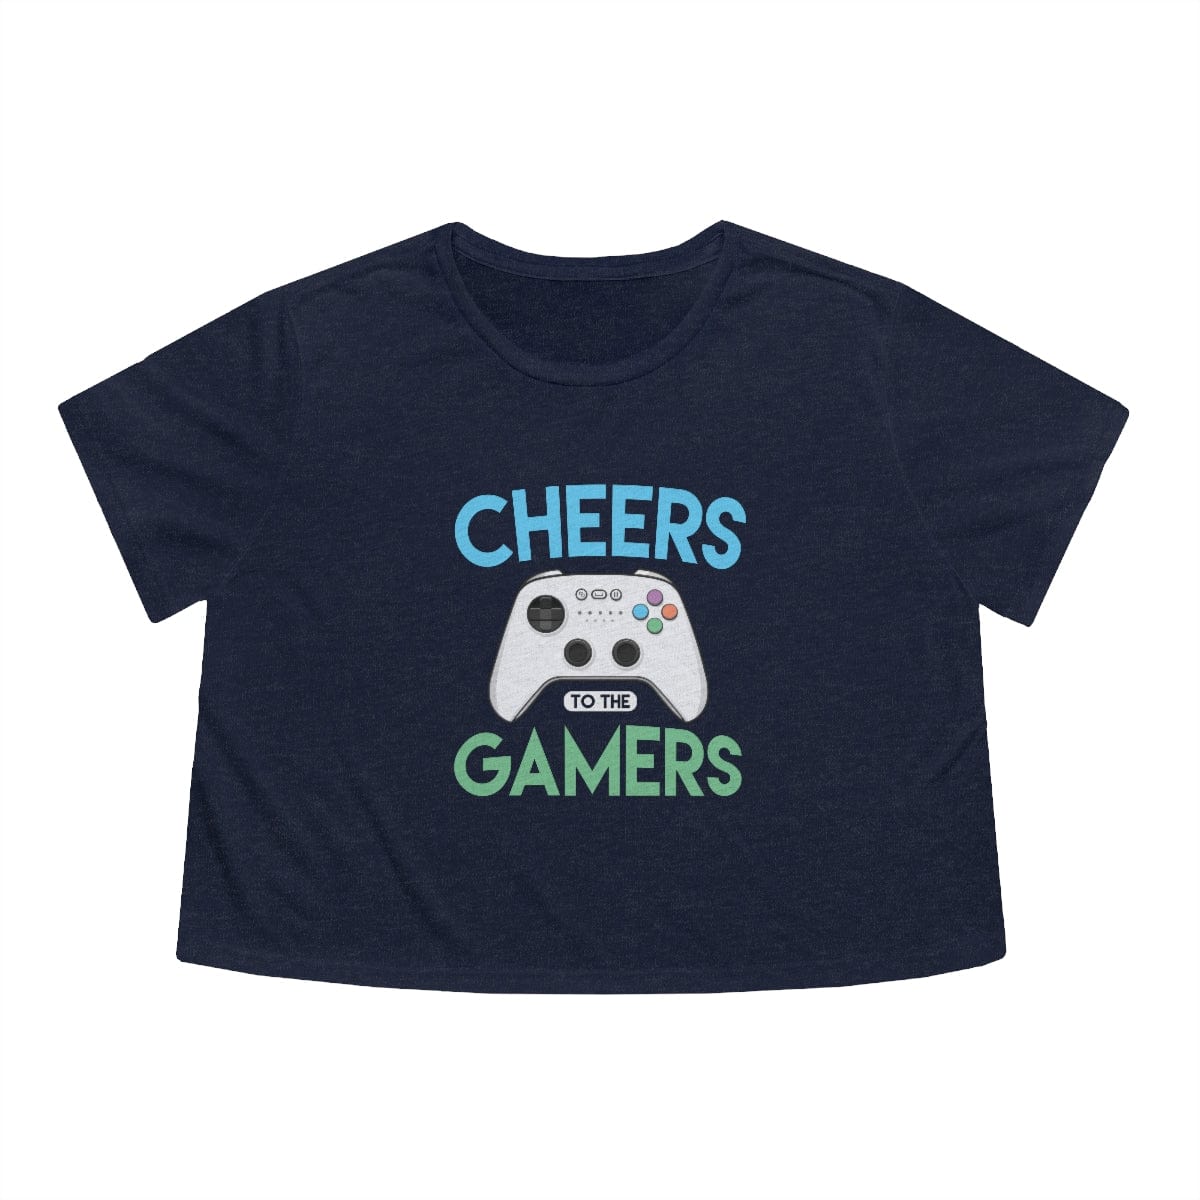 Cheers To The Gamers Women's Heather Navy Blue Flowy Cropped Tee